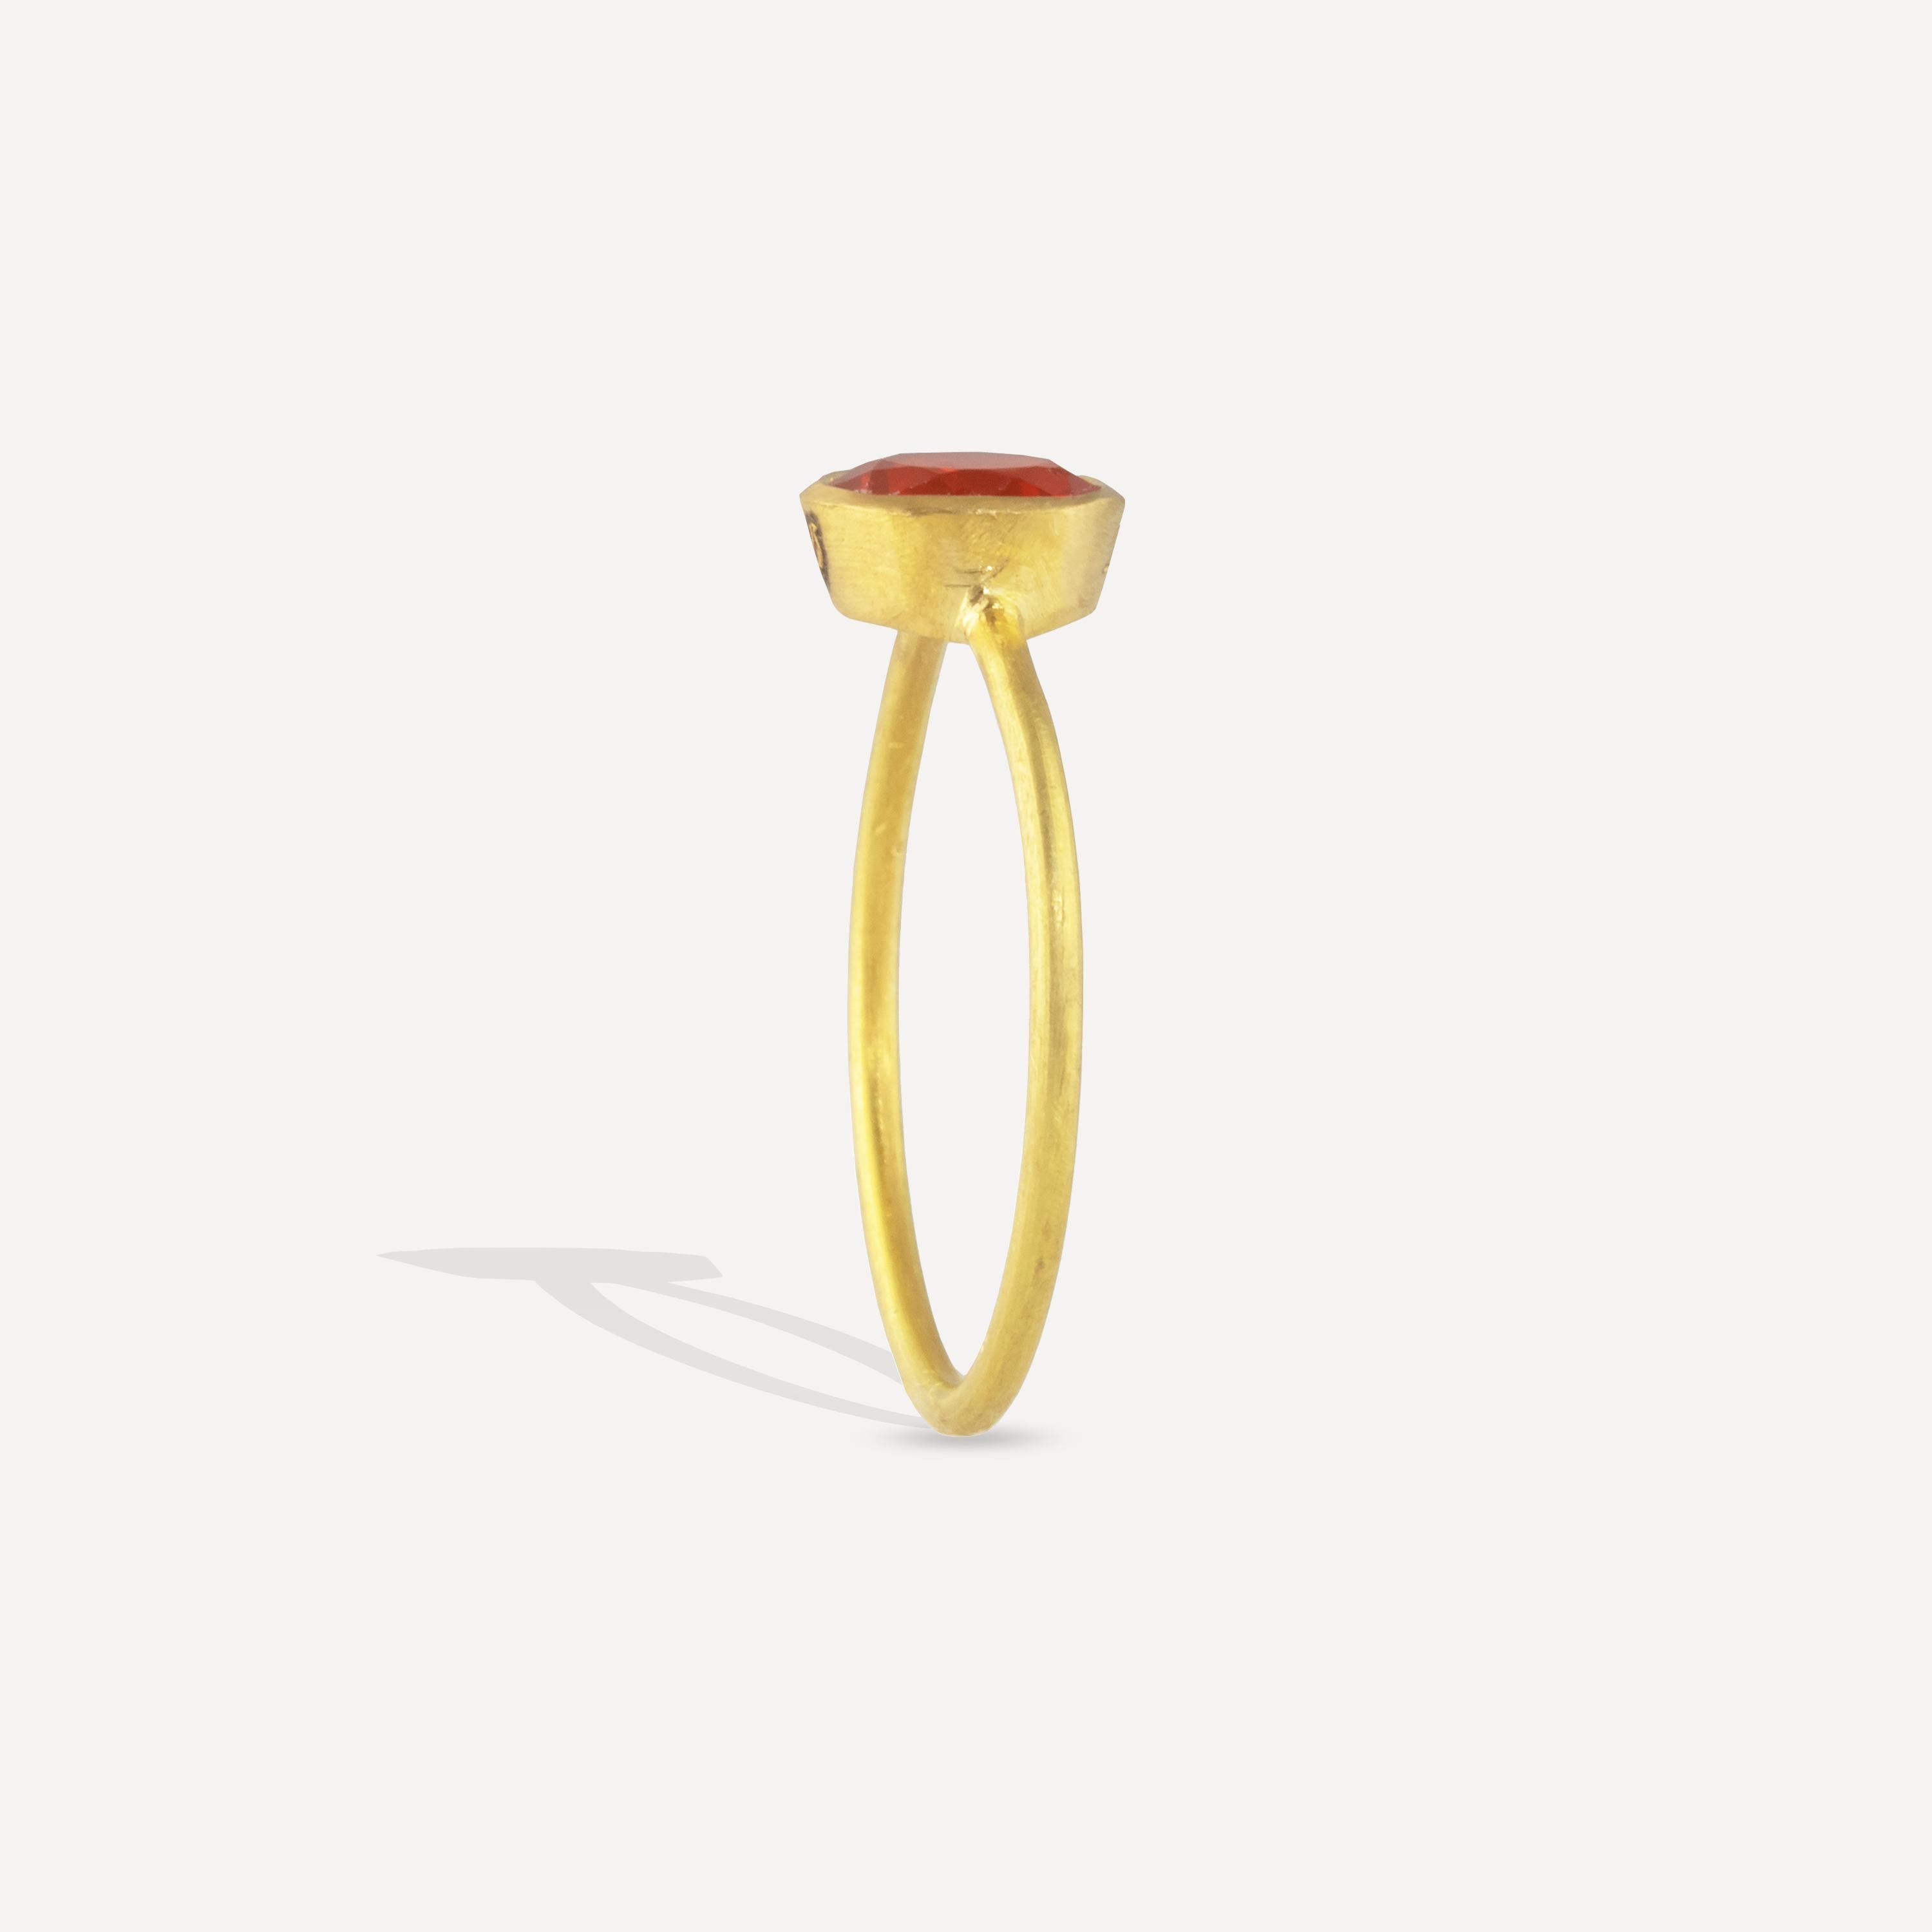 Brilliant Cut Ico & the Bird Fine Jewelry Fire Opal Stacking Ring 22k Gold For Sale